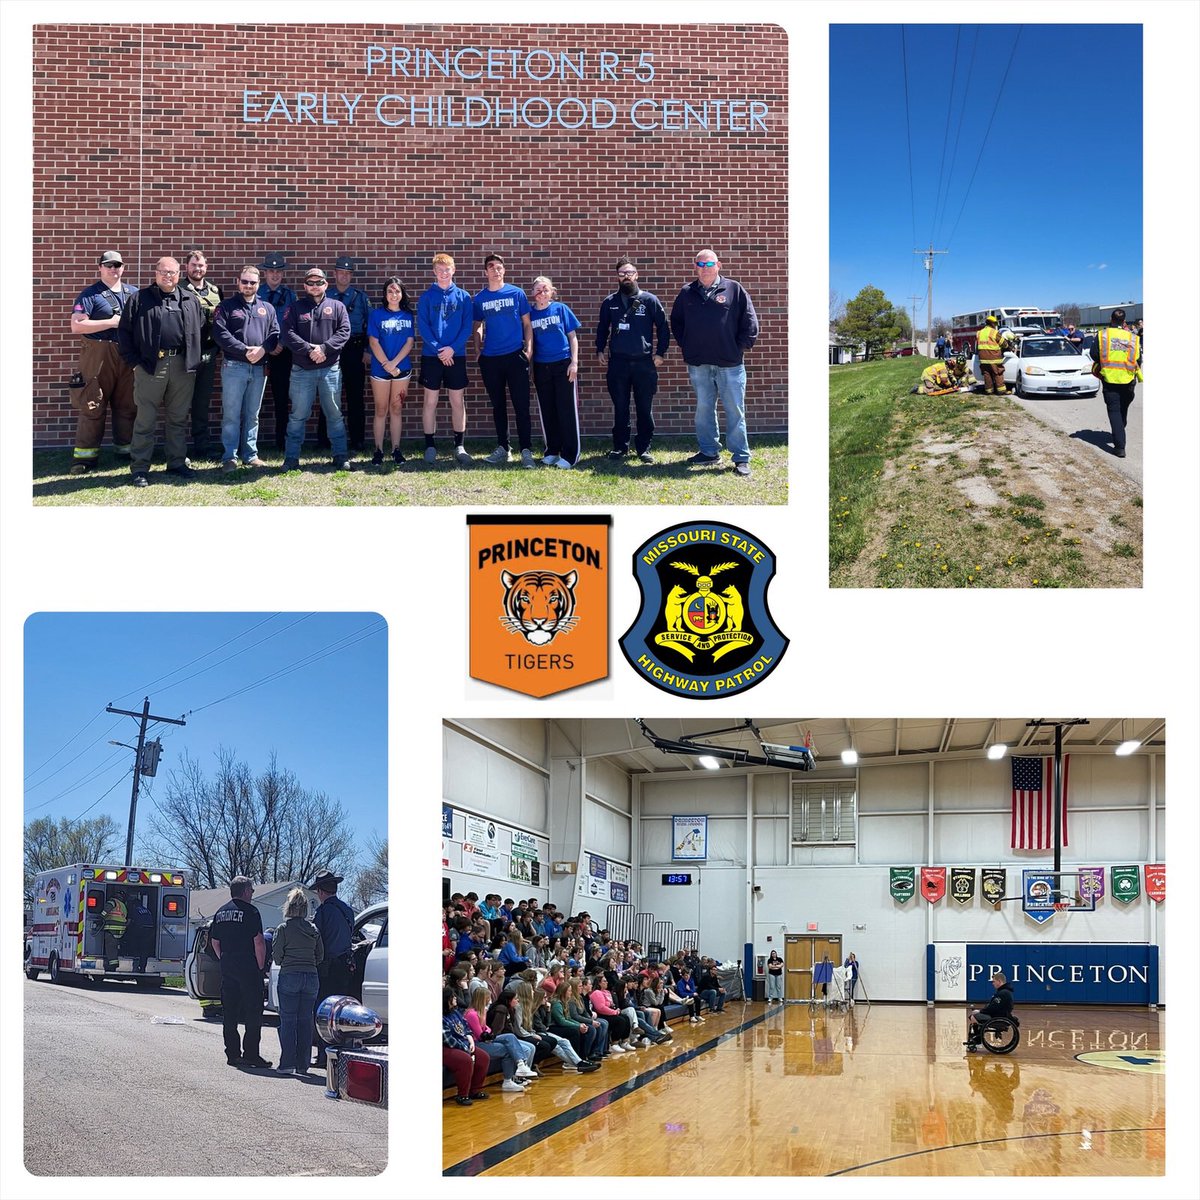 Collaborated with Mercer County Sheriff’s Office and local first responders for a docudrama at Princeton R-5. We highlighted the risks of impaired driving. Grateful this was a docudrama and everyone returned home safely. Let's remember, that’s not always the outcome. #ArriveAlive